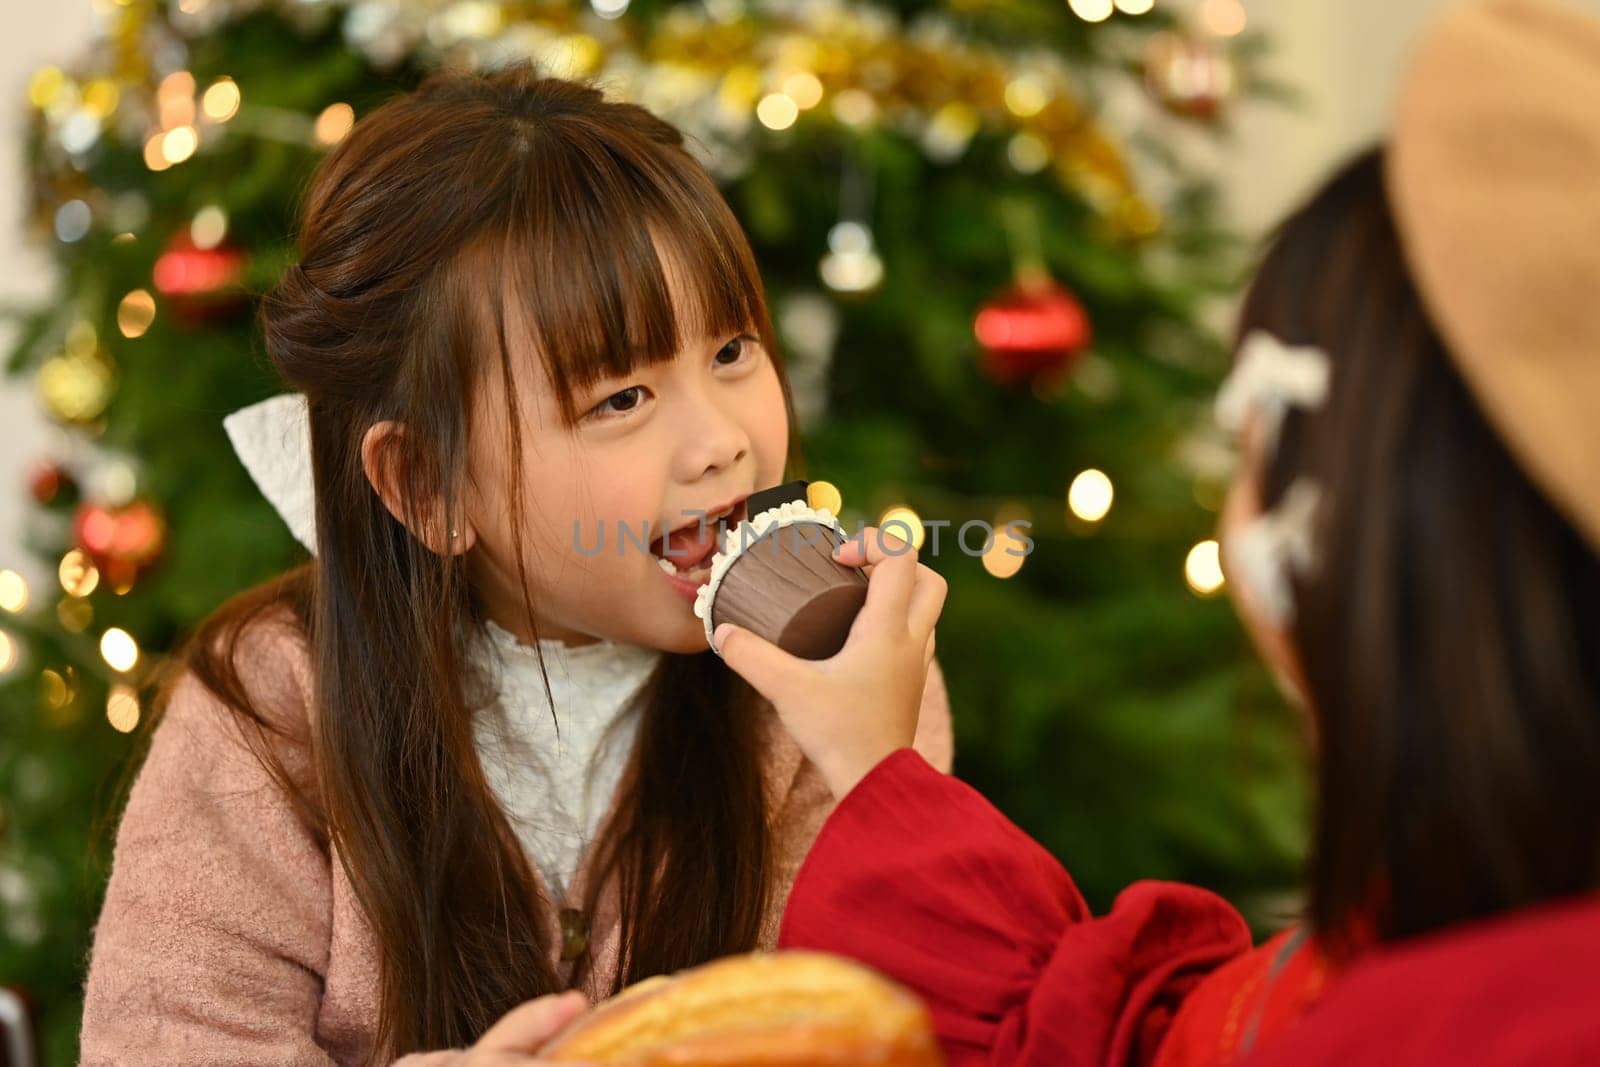 Cute little girl eating cupcake with a beautifully decorated Christmas tree on background by prathanchorruangsak